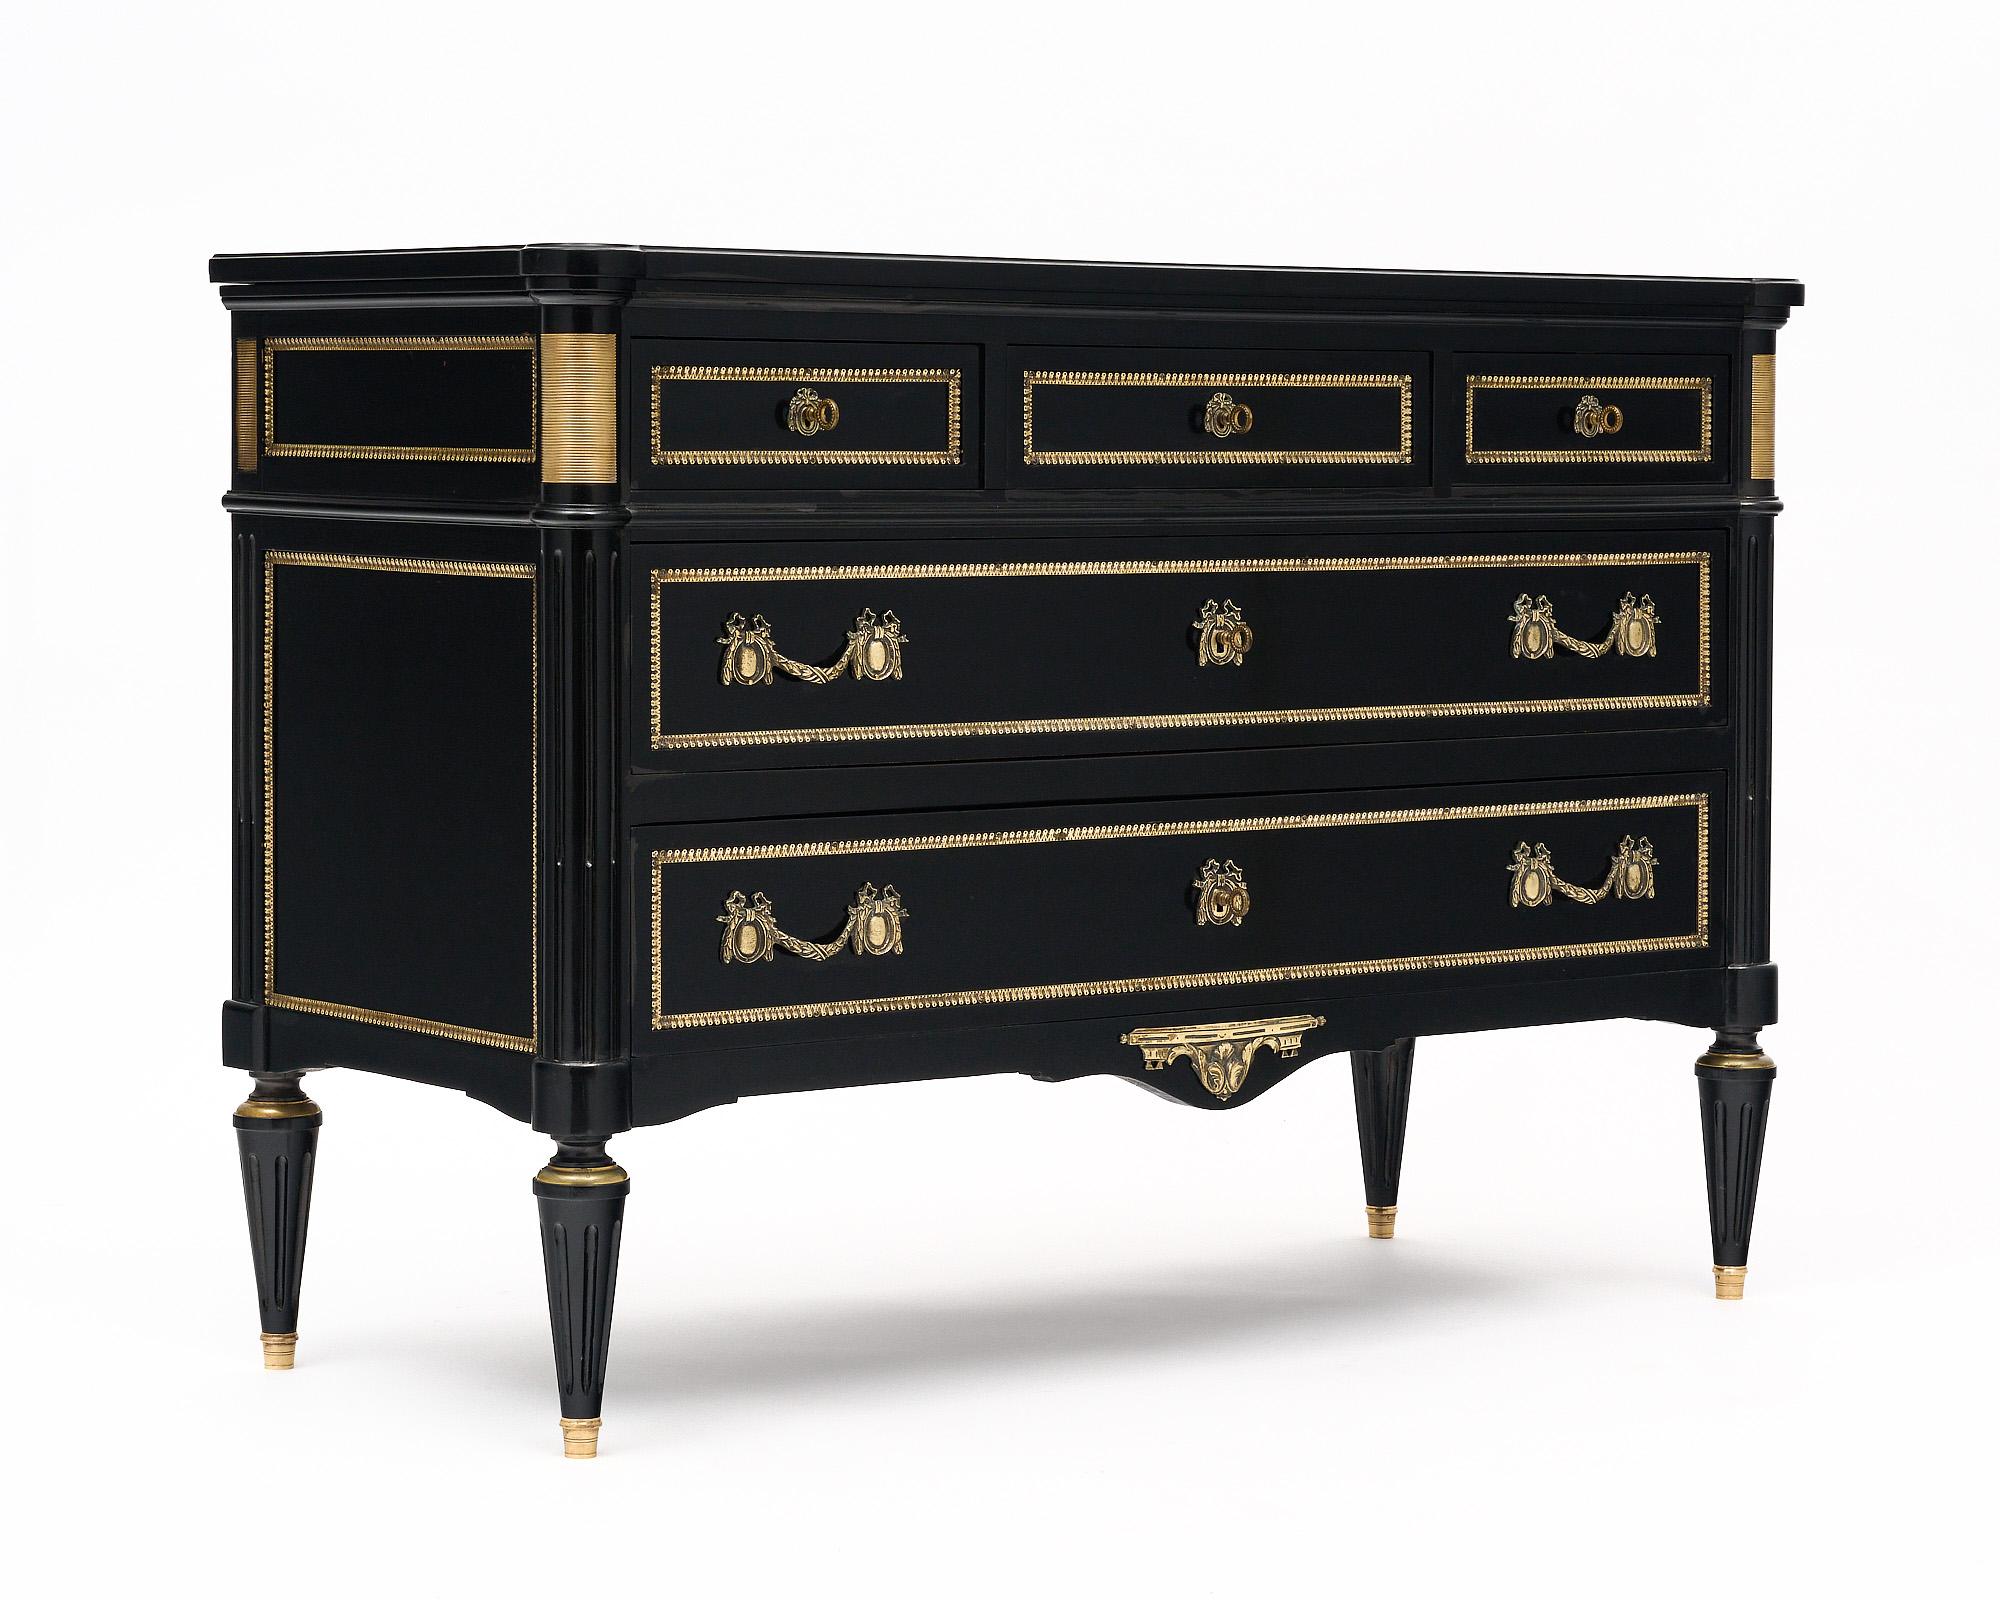 Chest of drawers from France in the Louis XVI style and featuring elaborate cast brass trim, hardware, and detailing throughout. This piece has been ebonized and finished with a lustrous French polish. There are three dovetailed drawers above two